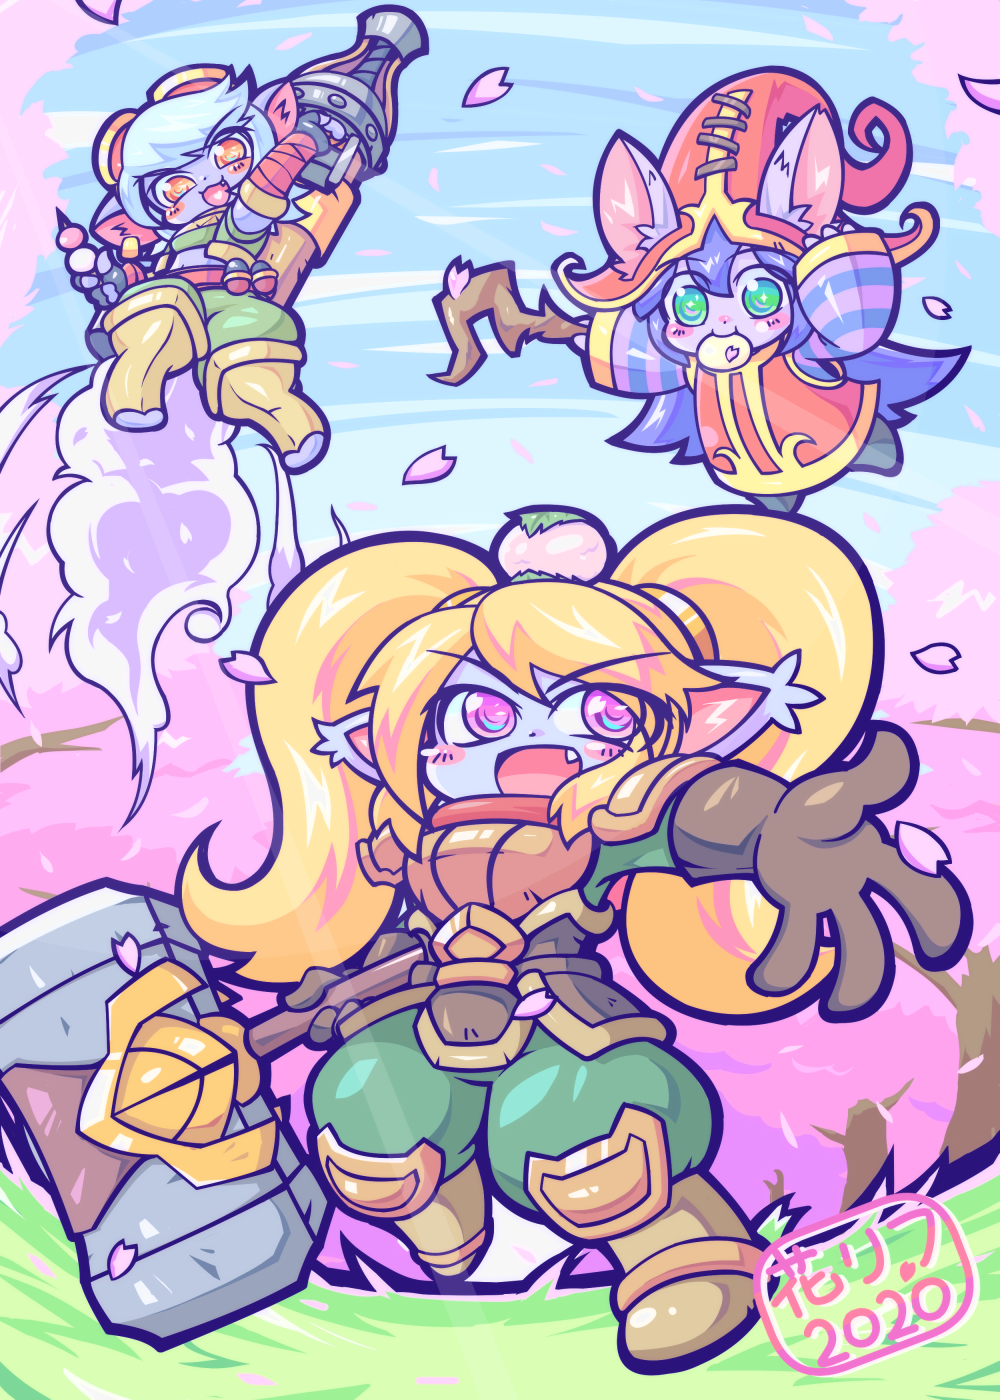 3girls :3 :d animal_ears blonde_hair blush_stickers cherry_blossoms commentary_request dango eyebrows_visible_through_hair fang food food_in_mouth goggles goggles_on_head green_eyes highres holding holding_hammer kayo!!_(gotoran) league_of_legends long_hair looking_at_viewer lulu_(league_of_legends) medium_hair multiple_girls open_mouth orange_eyes poppy rocket_jumping silver_hair smile striped_sleeves tristana violet_eyes wagashi yordle